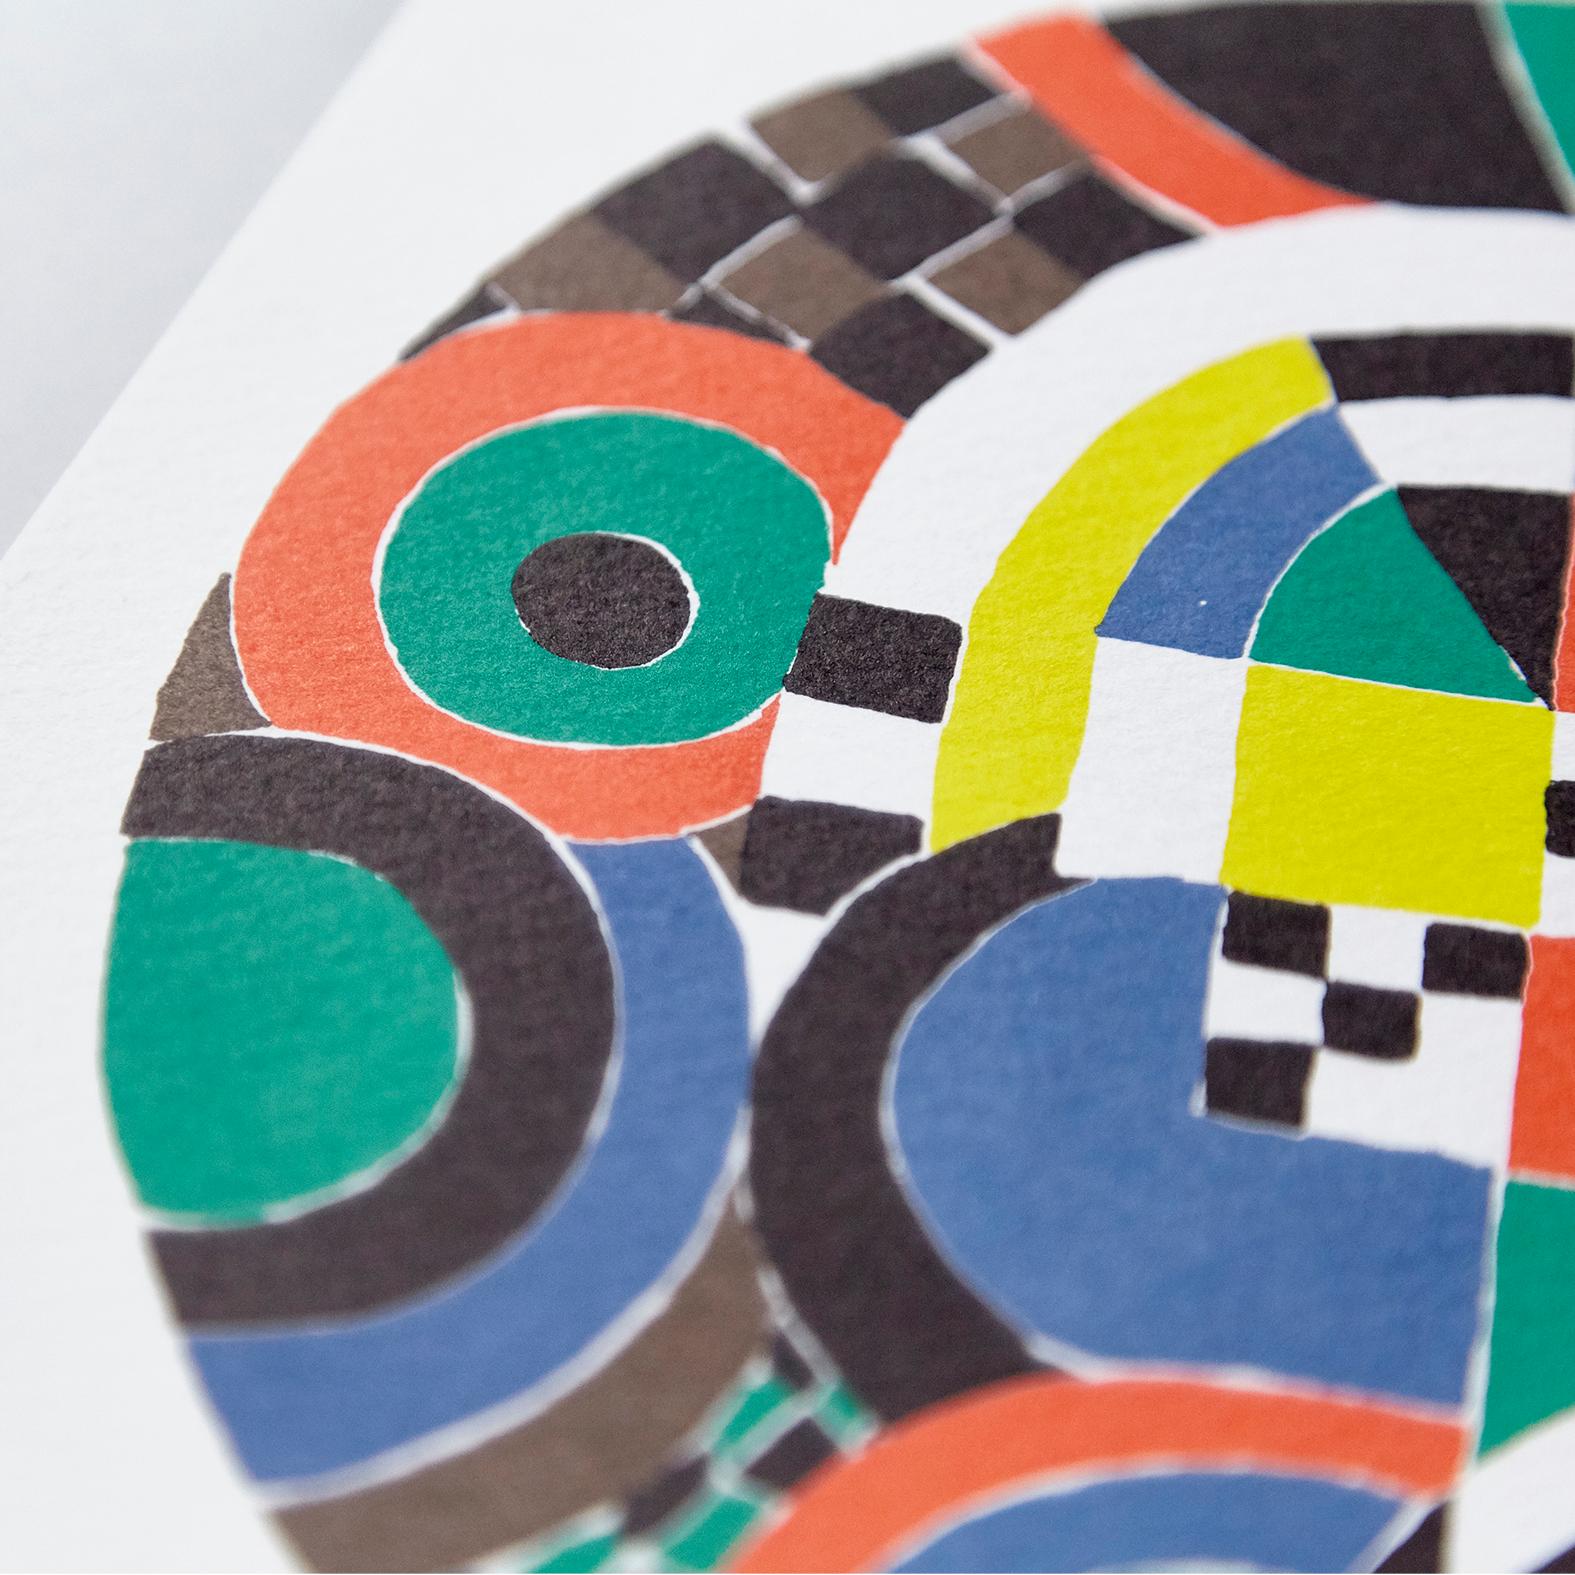 Late 20th Century Sonia Delaunay, Geometric Abstraction, Red, Green, Blue, Yellow Photolithography